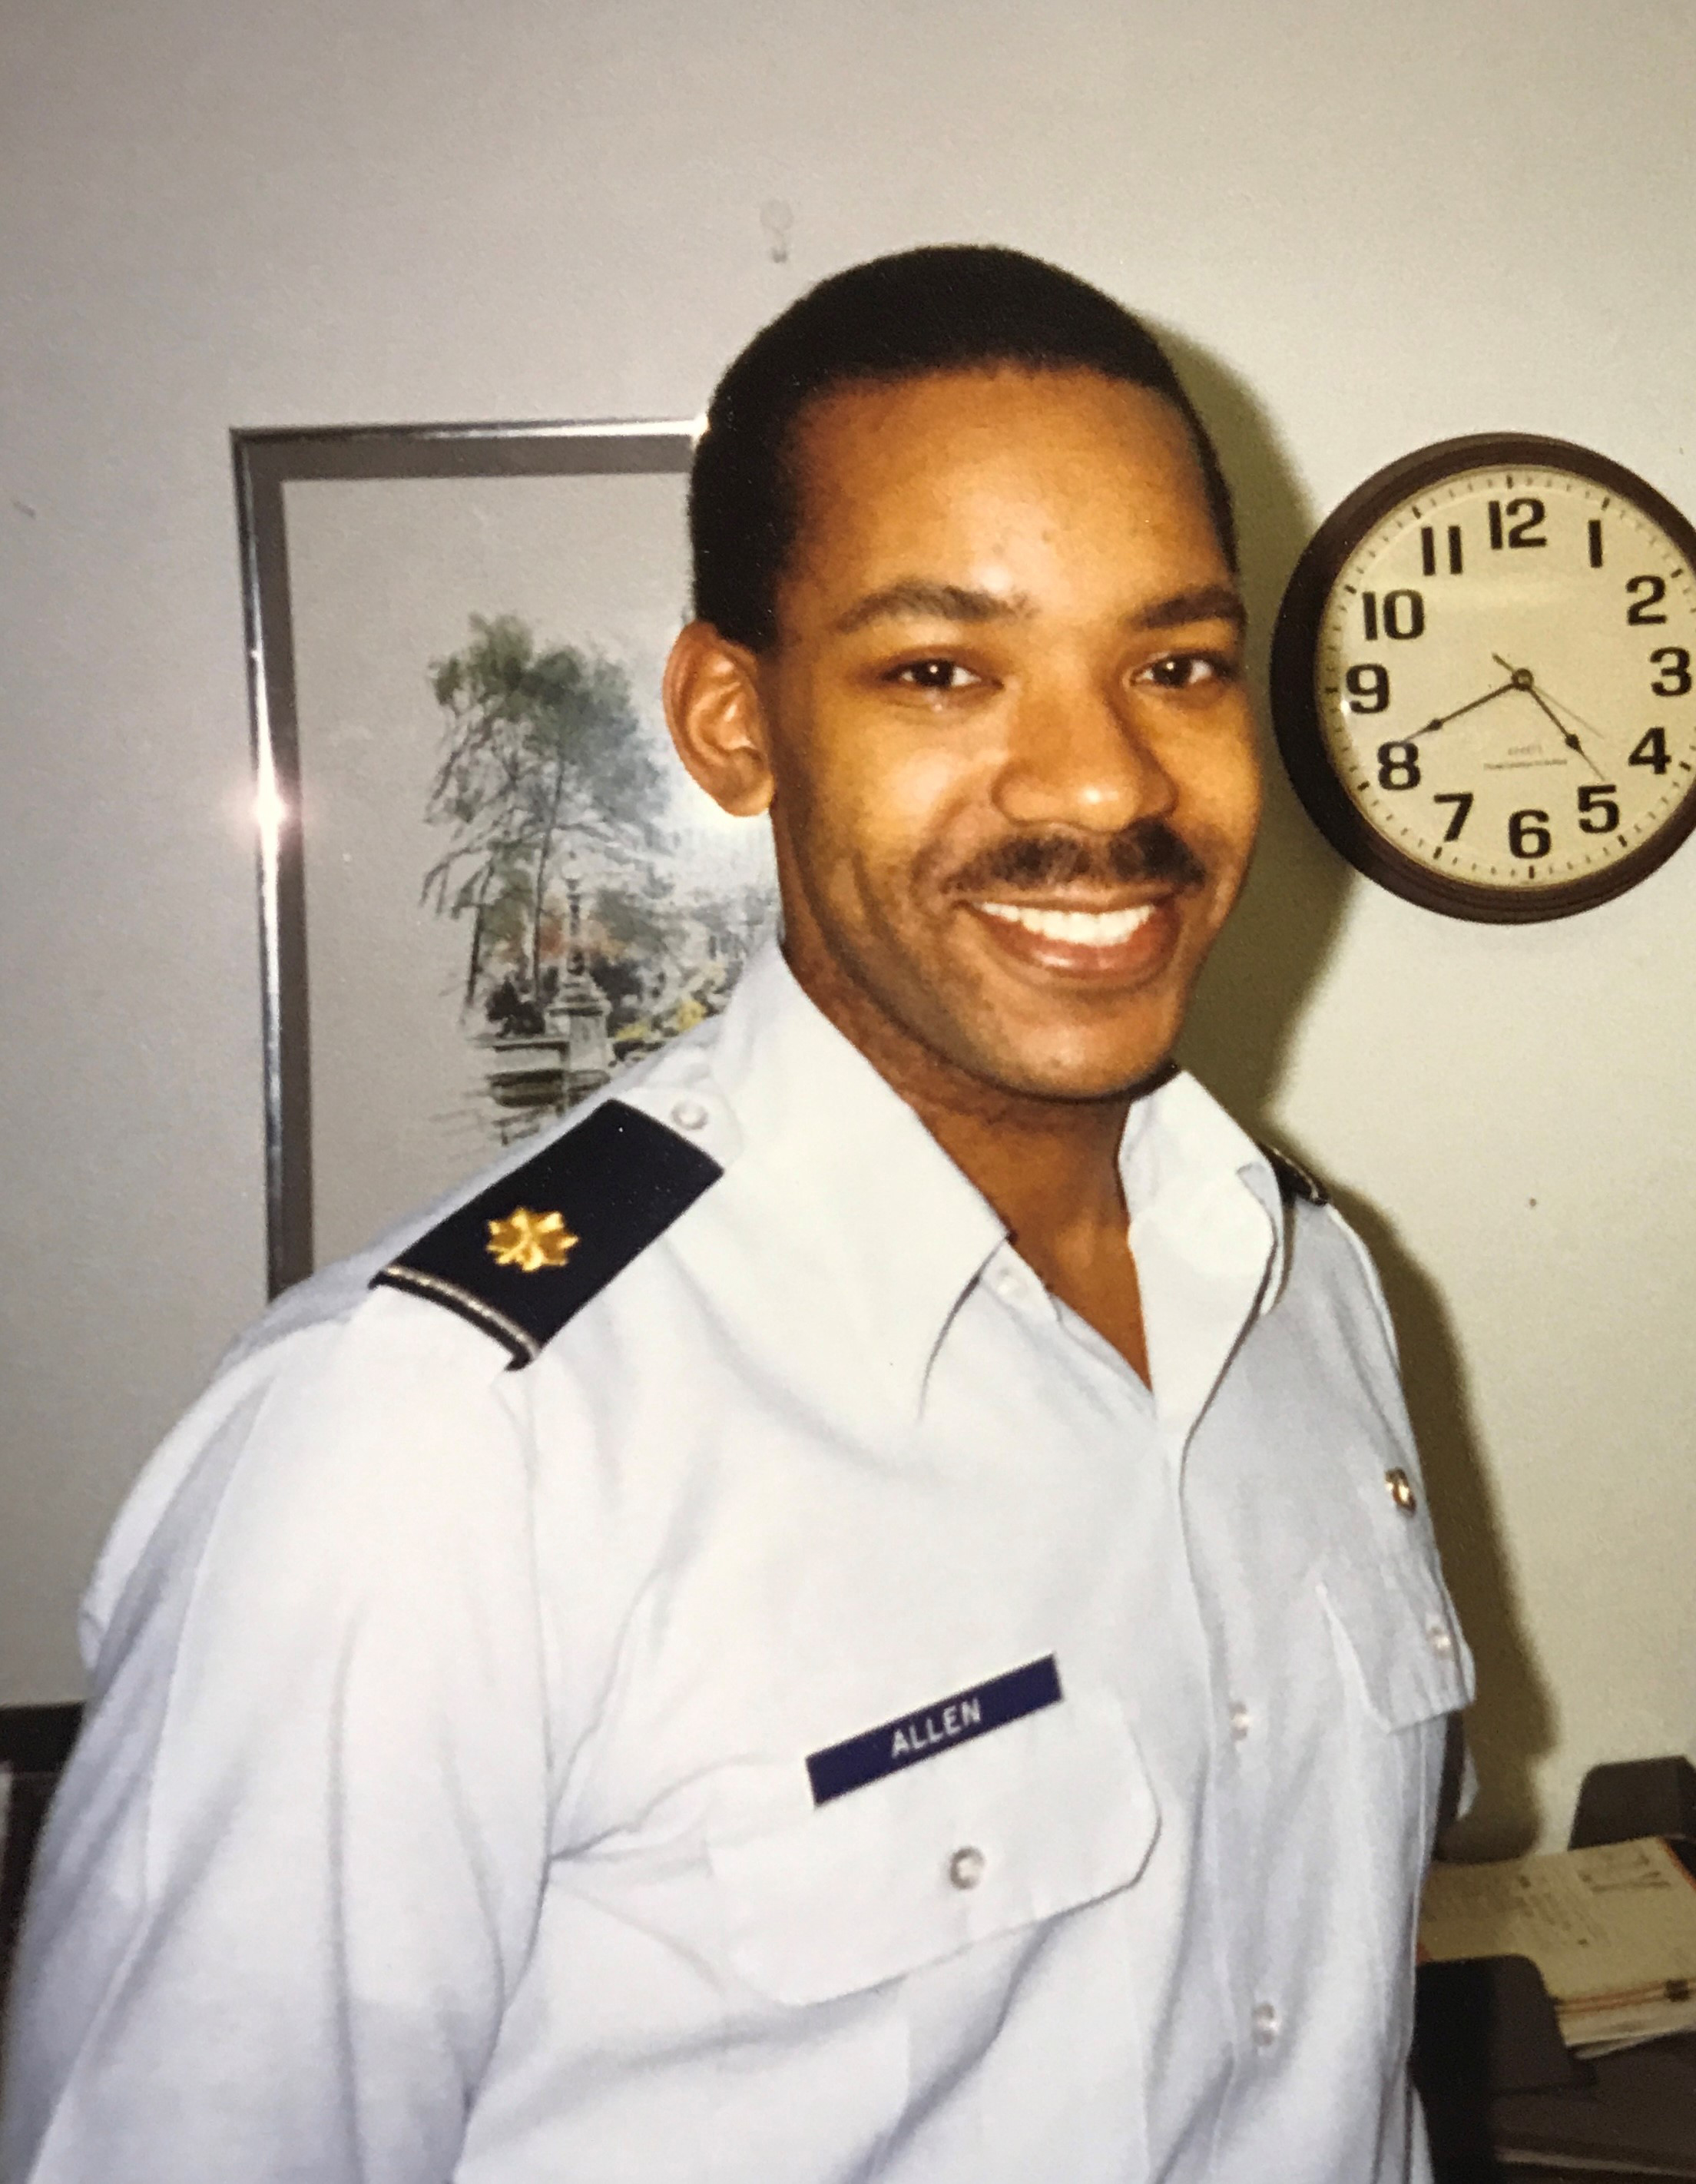 Dr. Allen’s three-year commitment turned into a 32-year career with the U.S. Air Force.